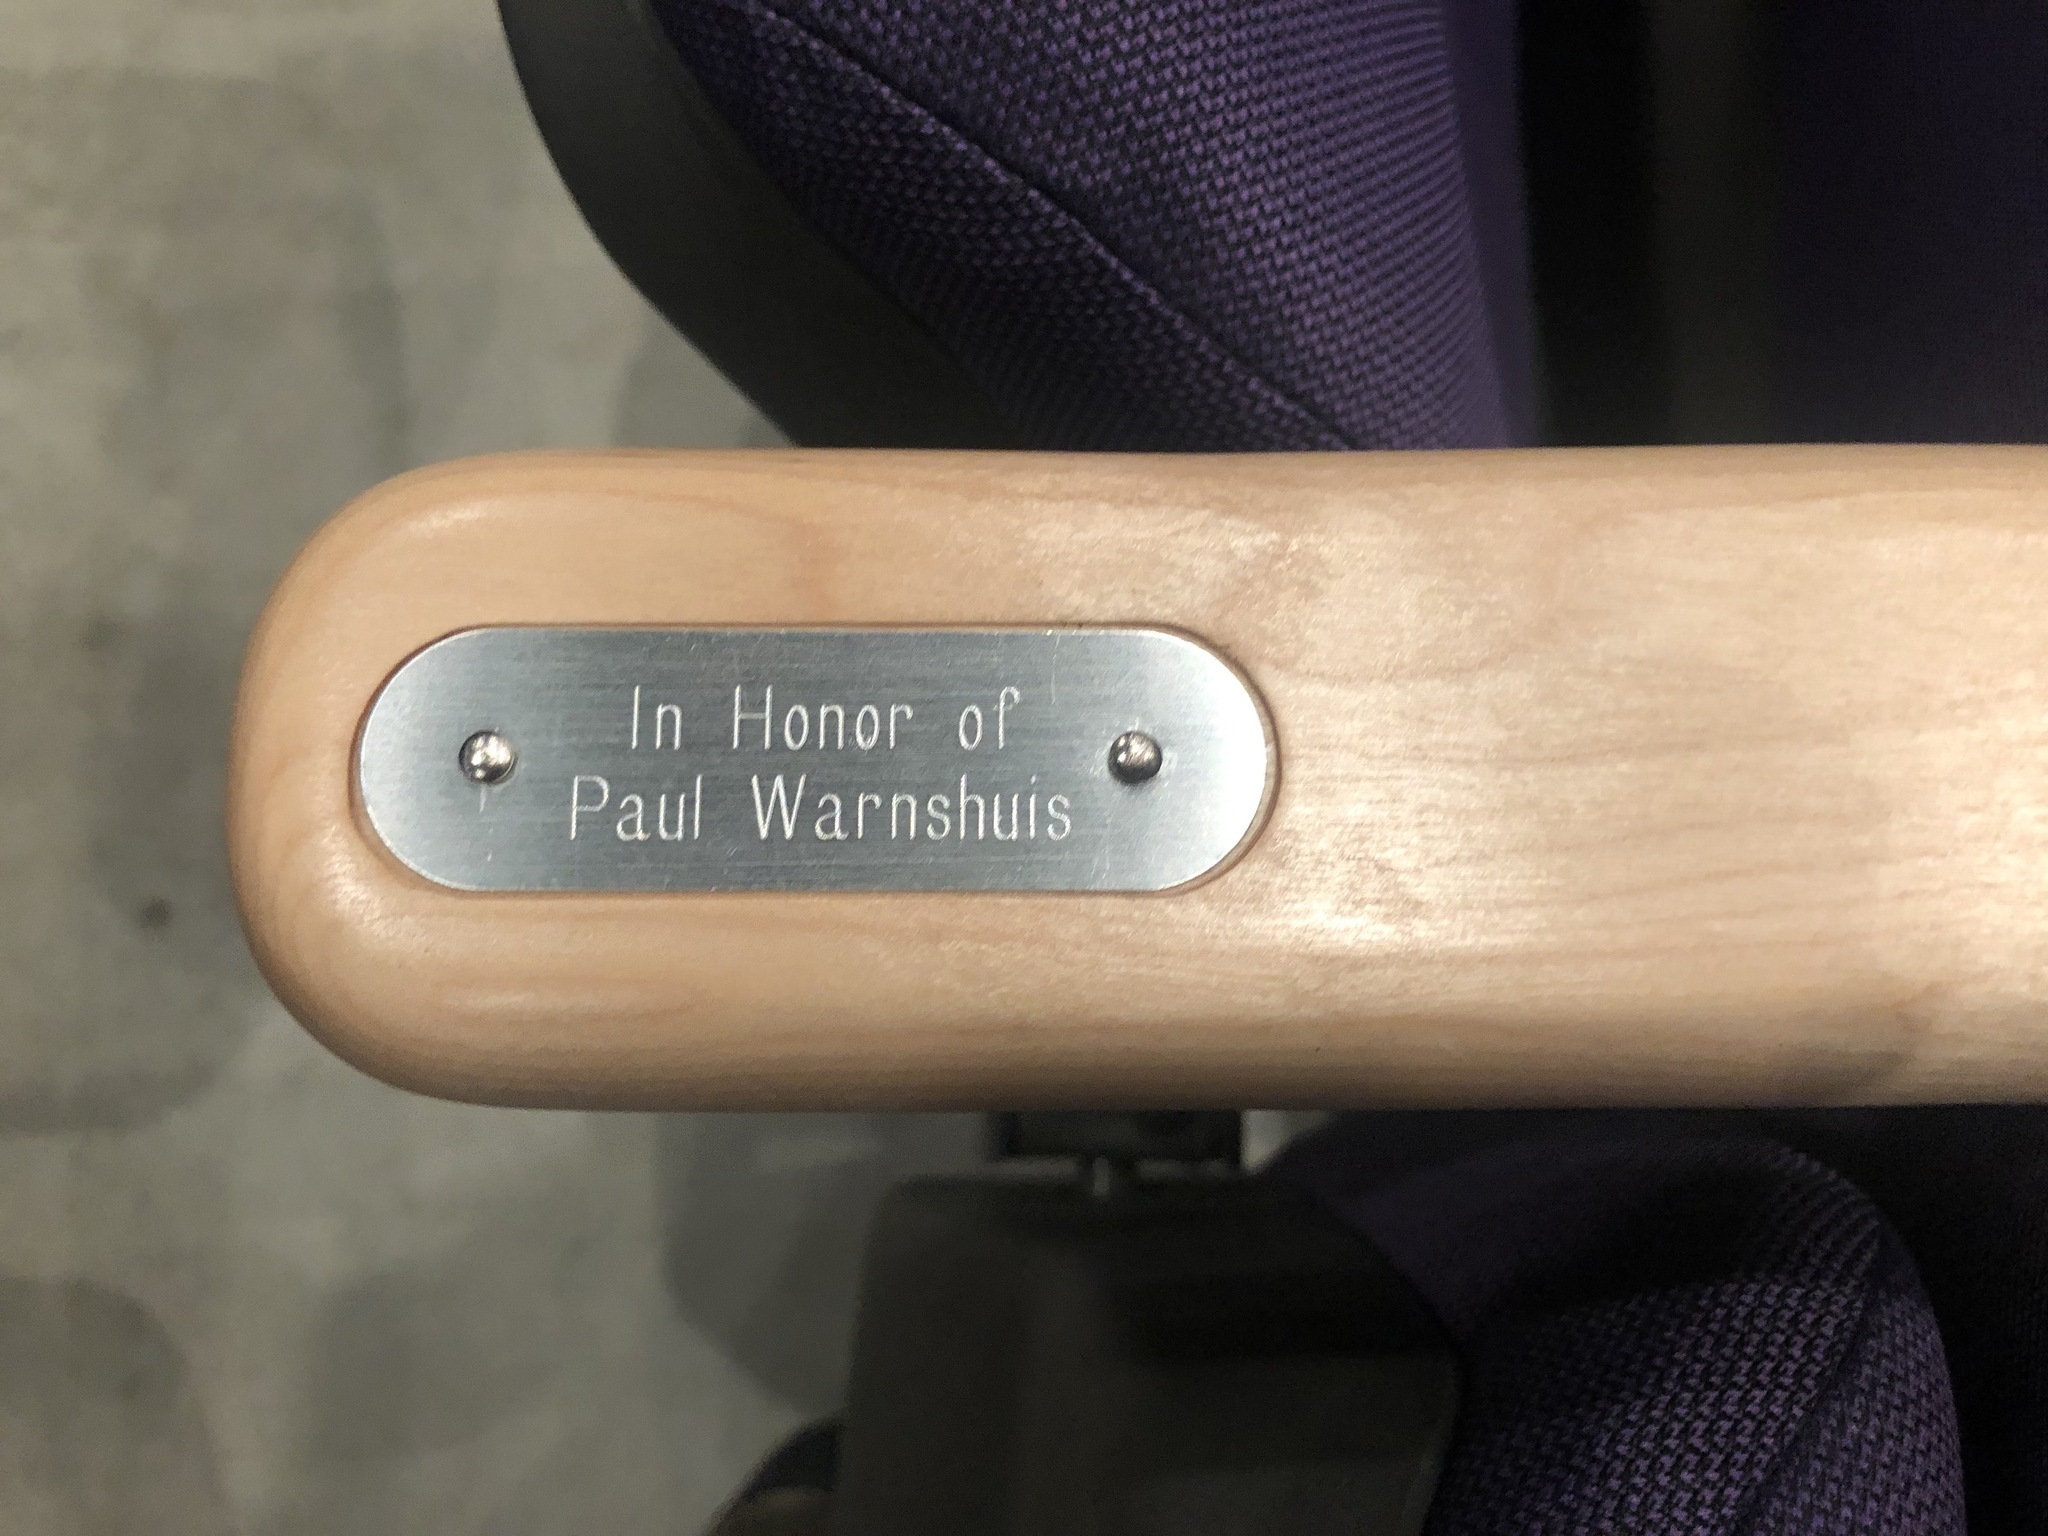 Sample of a nameplate on an Auditorium Seat.